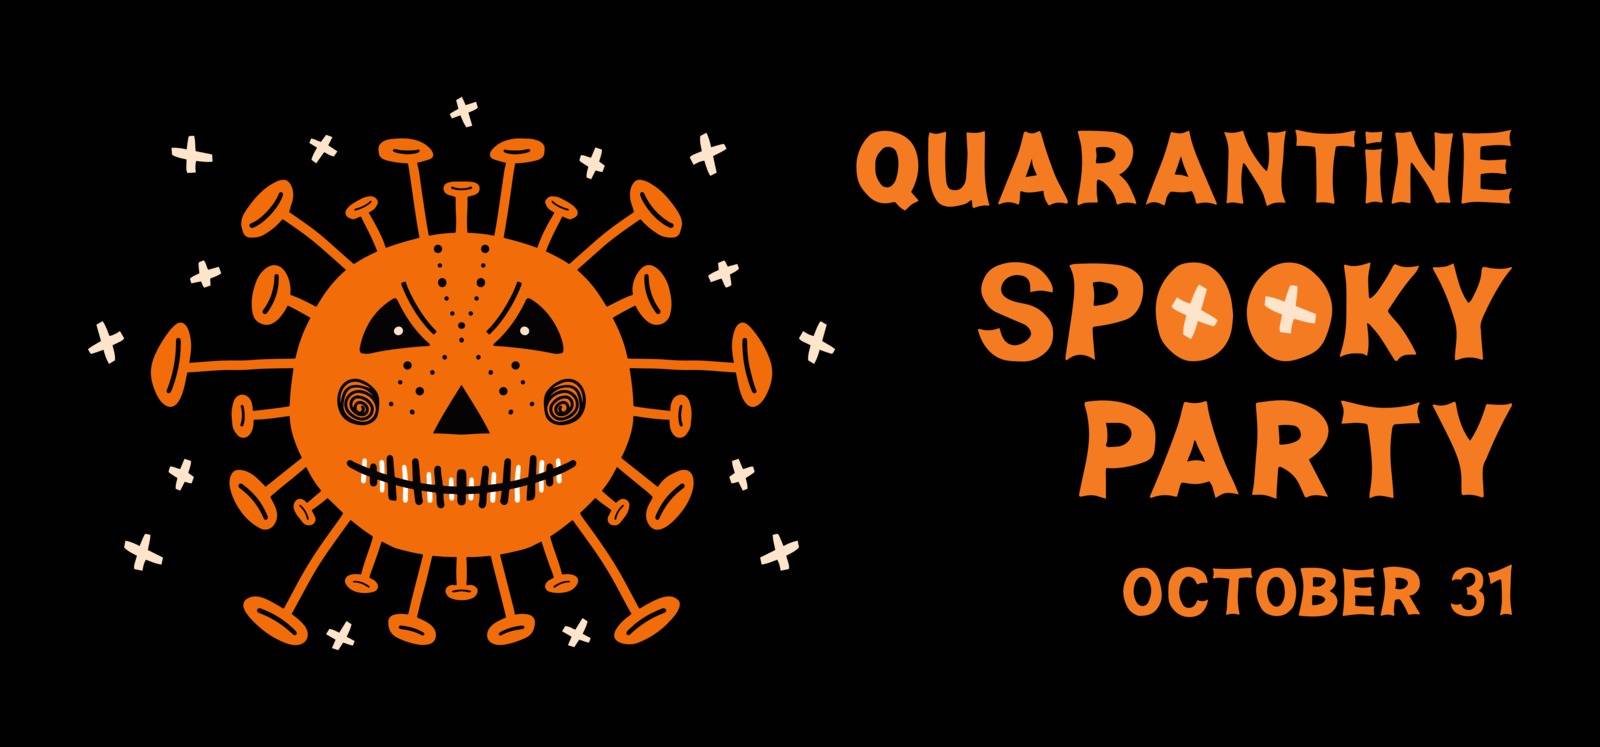 Halloween flyer. Coronavirus bacteria with scary face and orange lettering on a dark background. Vector stock illustration. by anna_artist